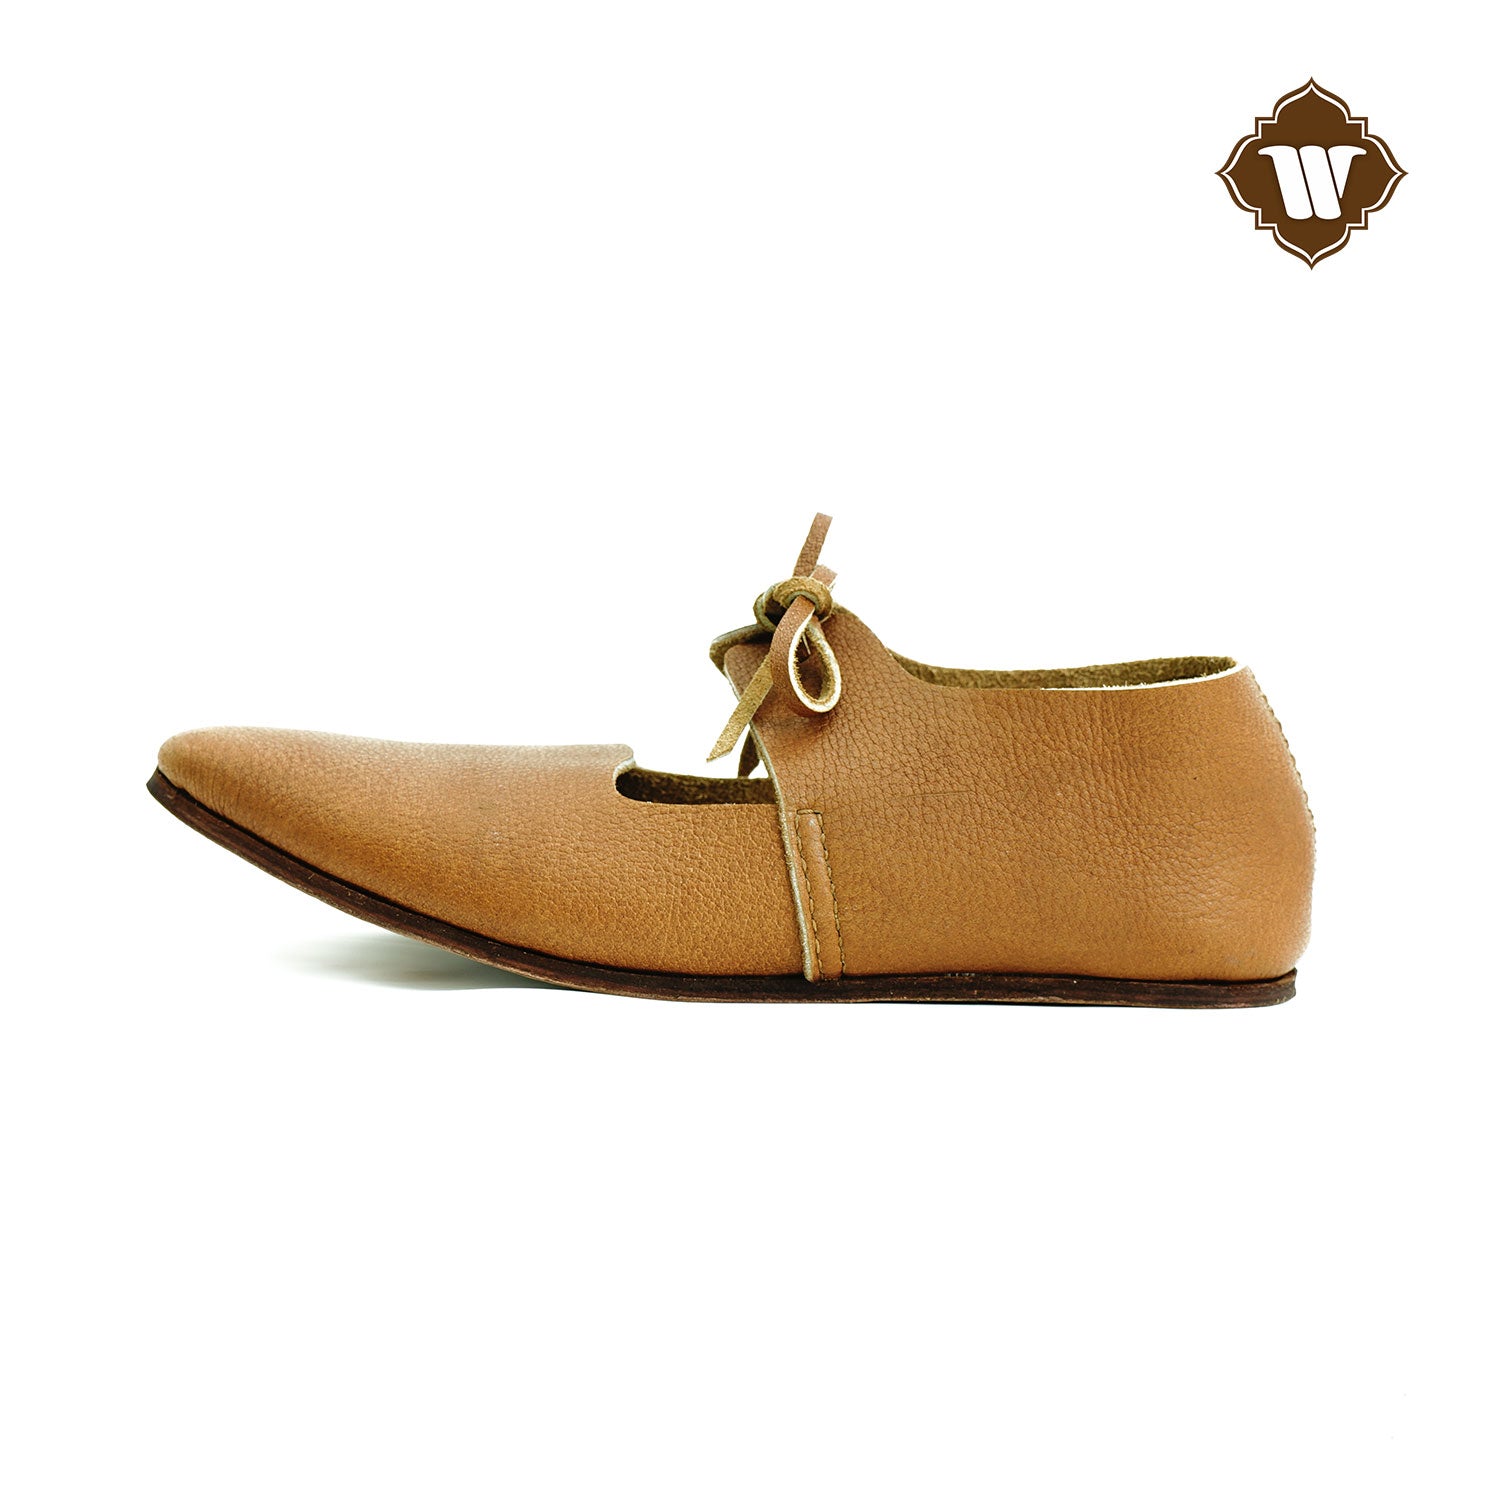 Westland Crafts 15th Century Medieval Latchet Shoes Handcrafted Leather Footwear for Men & Women